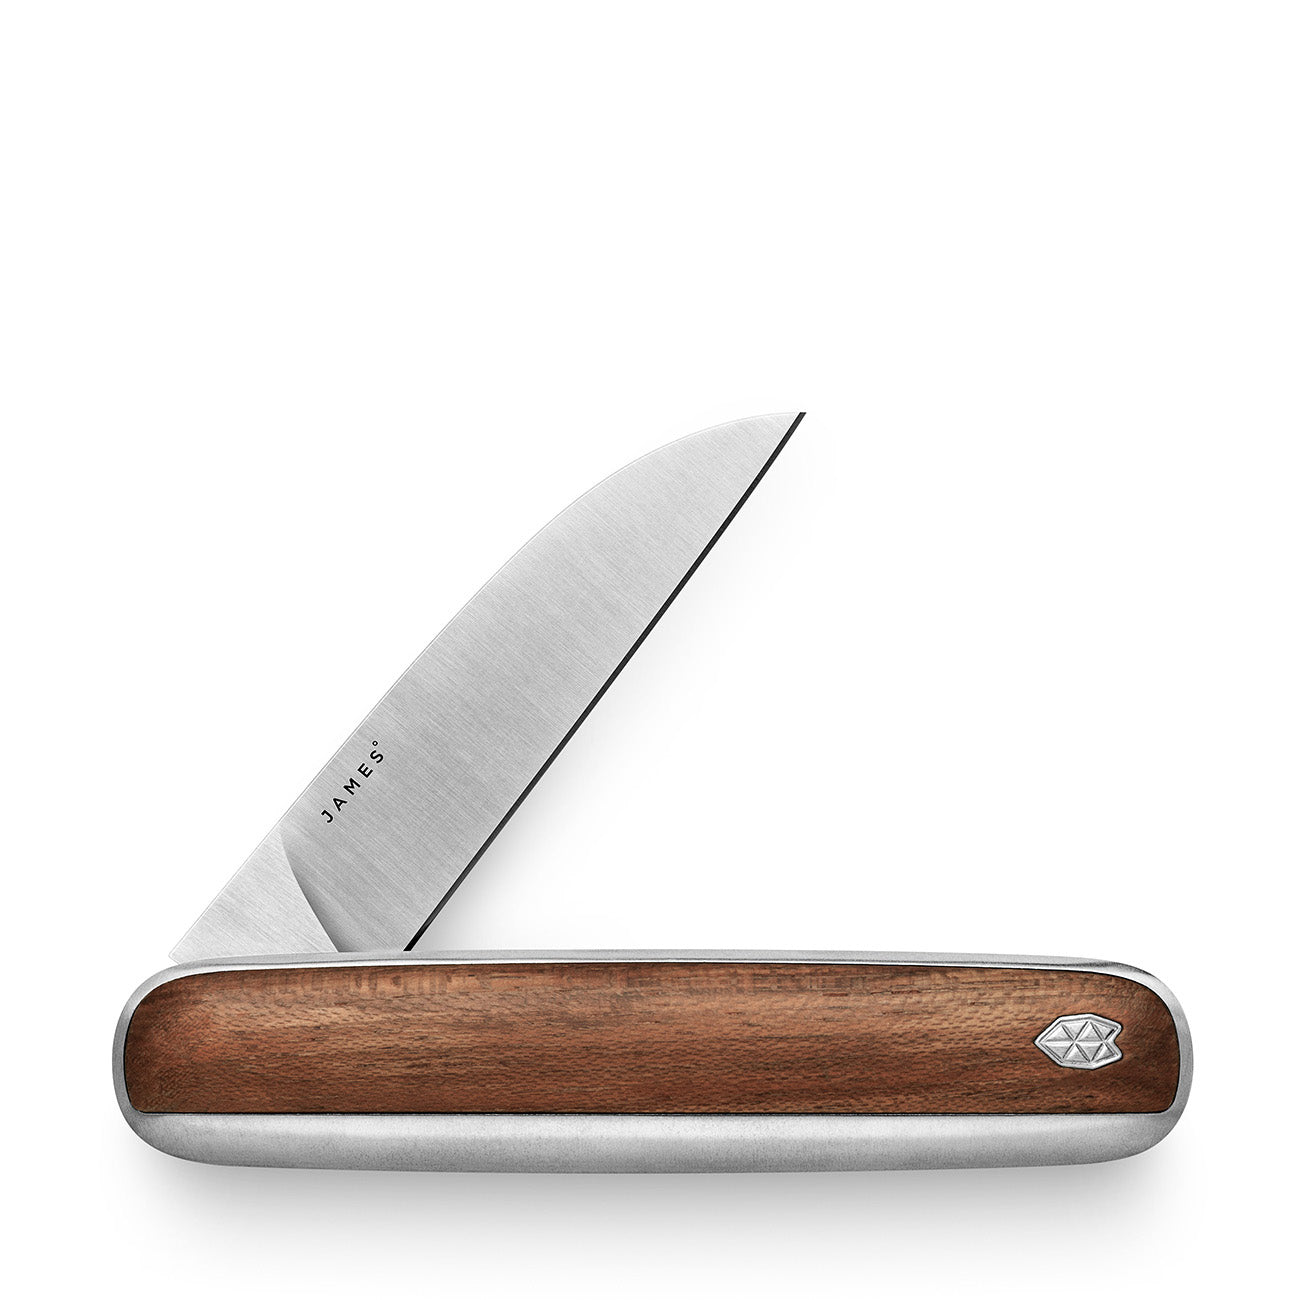 The James Brand The Pike Taschenmesser Rosewood Stainless Wood